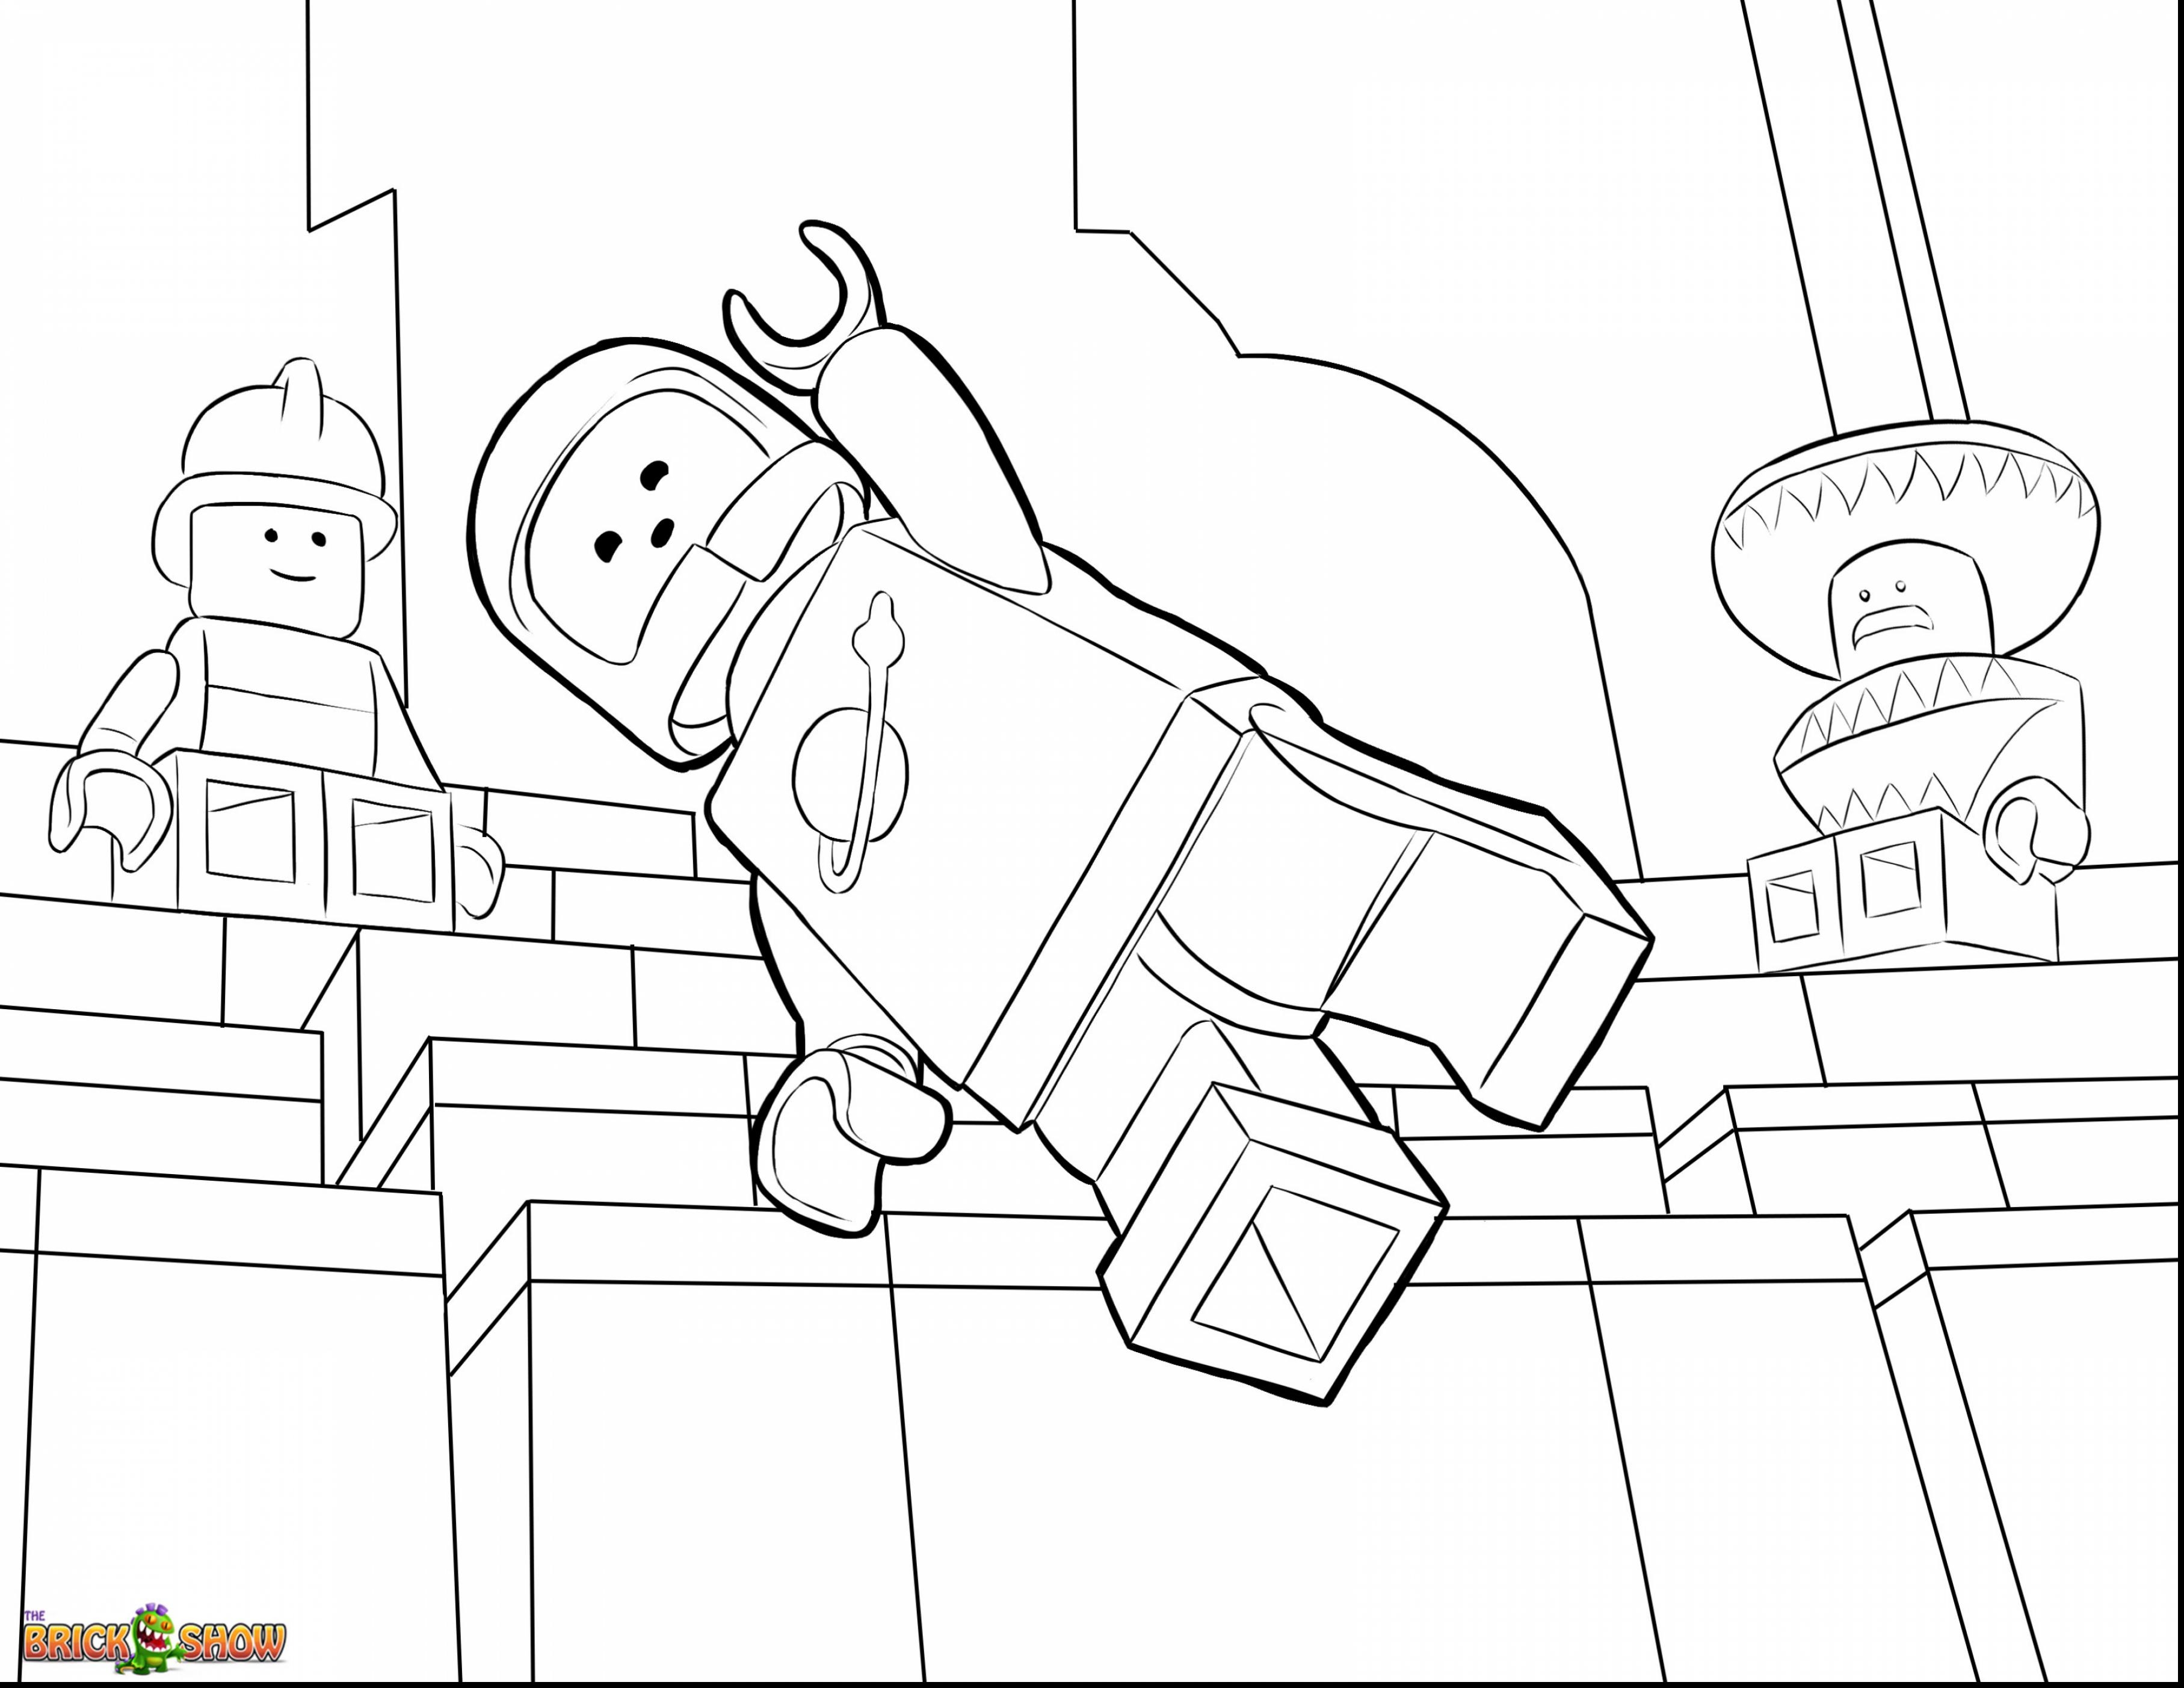 Lego Movie Coloring Pages at GetColorings.com | Free printable